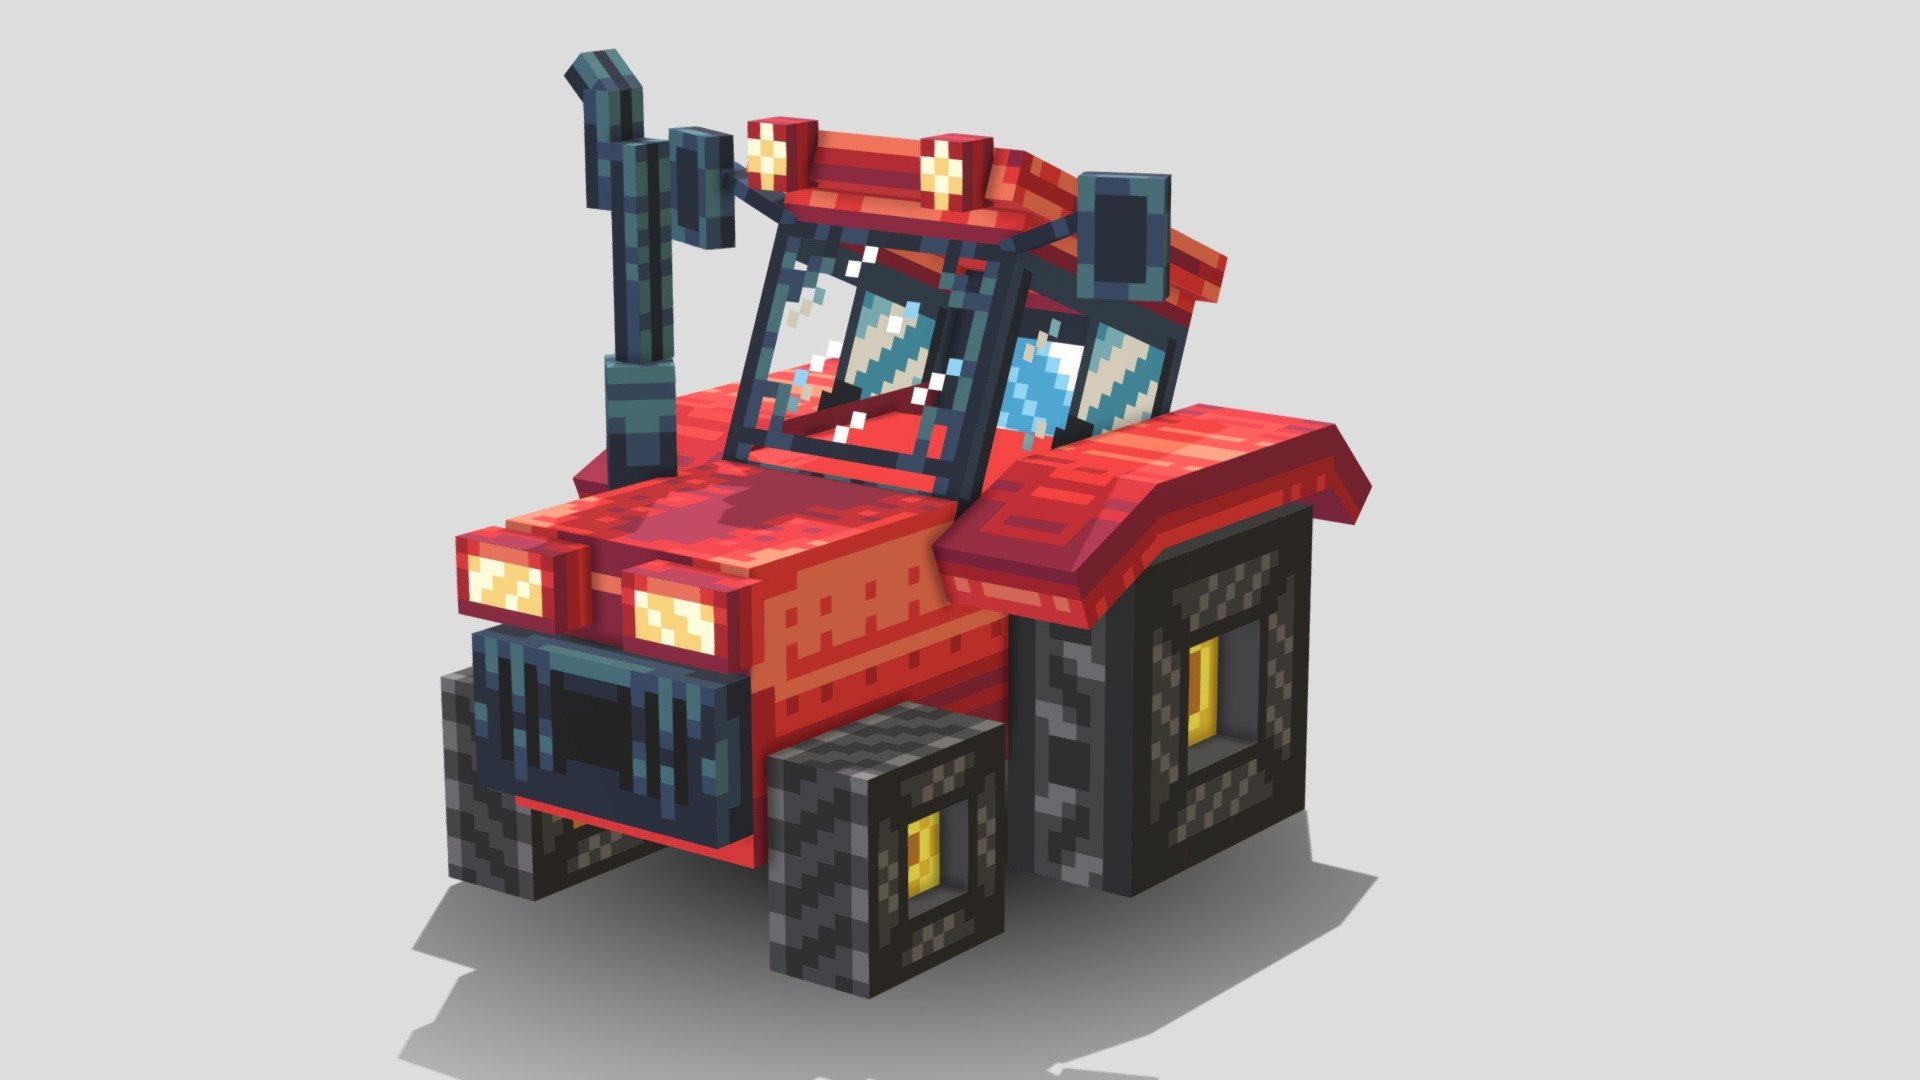 Final Red Farm Tractor Model!! - Red Farm Tractor - 3D model by Edge (@ItsEdge) 3d model